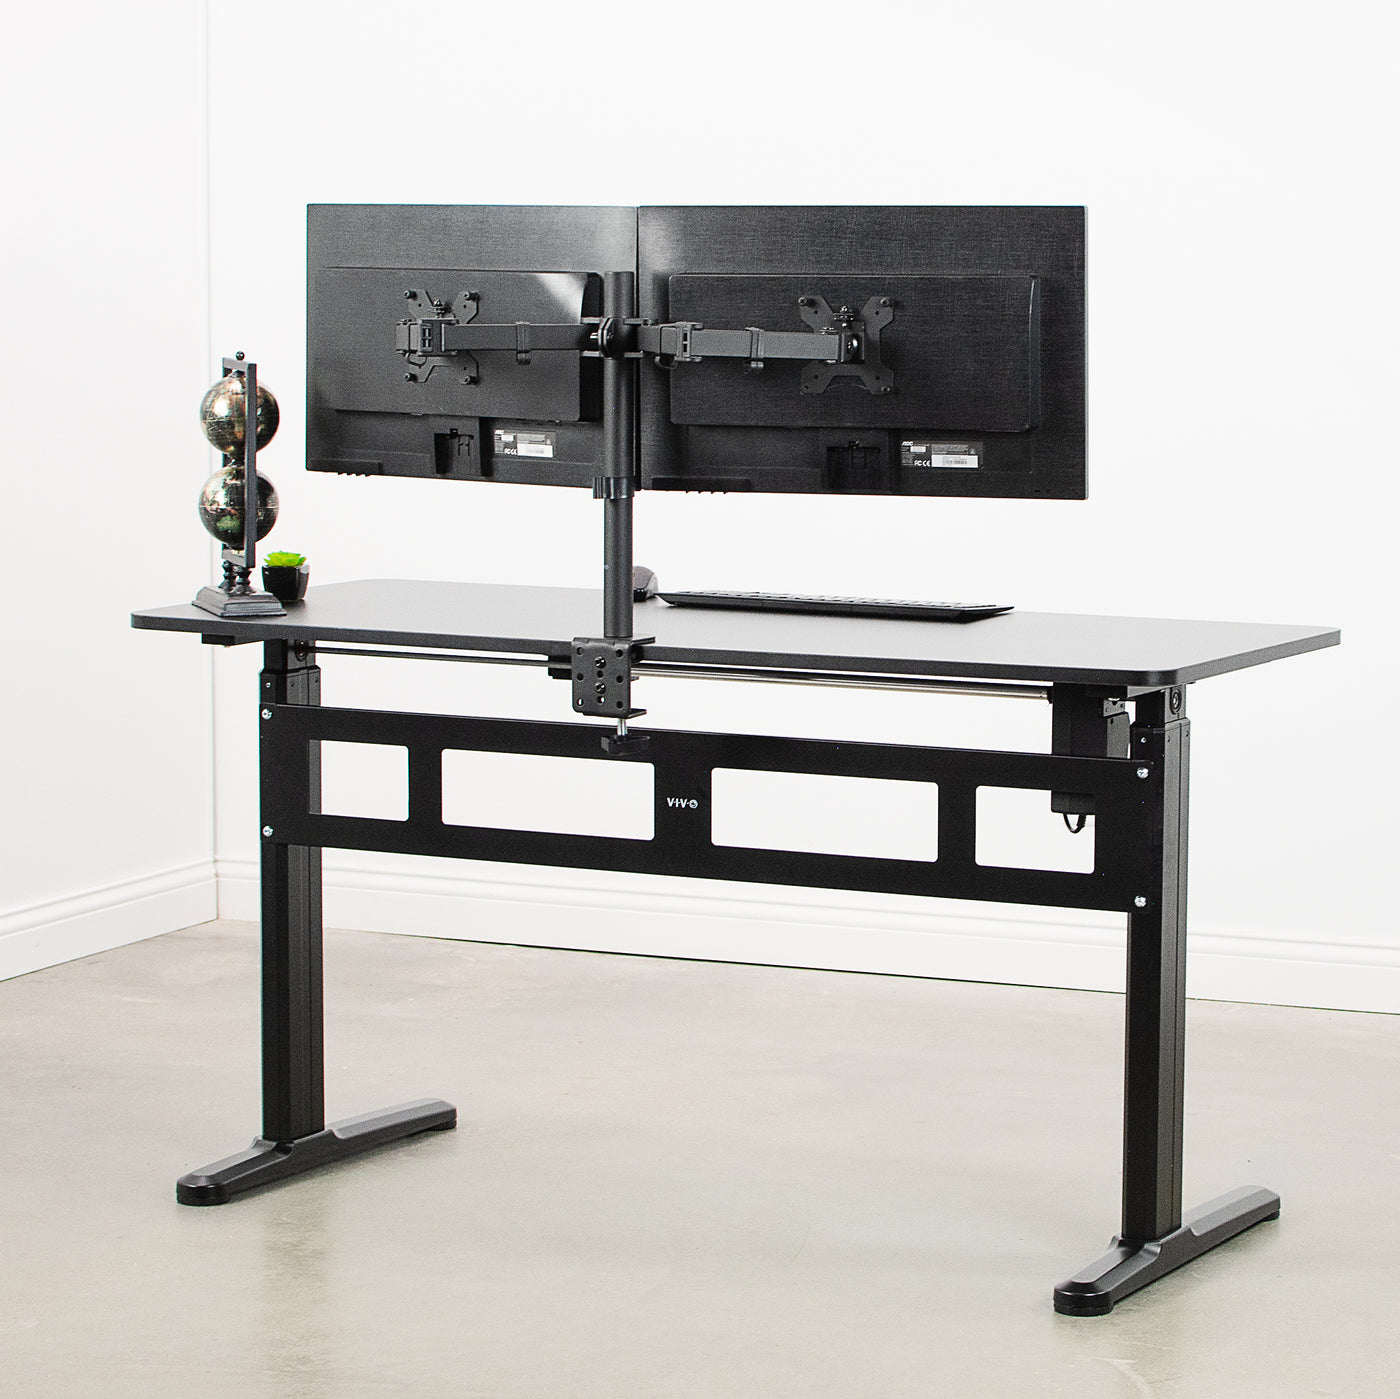 Sturdy electric desk with a solid steel frame to maximize support of expensive office equipment.